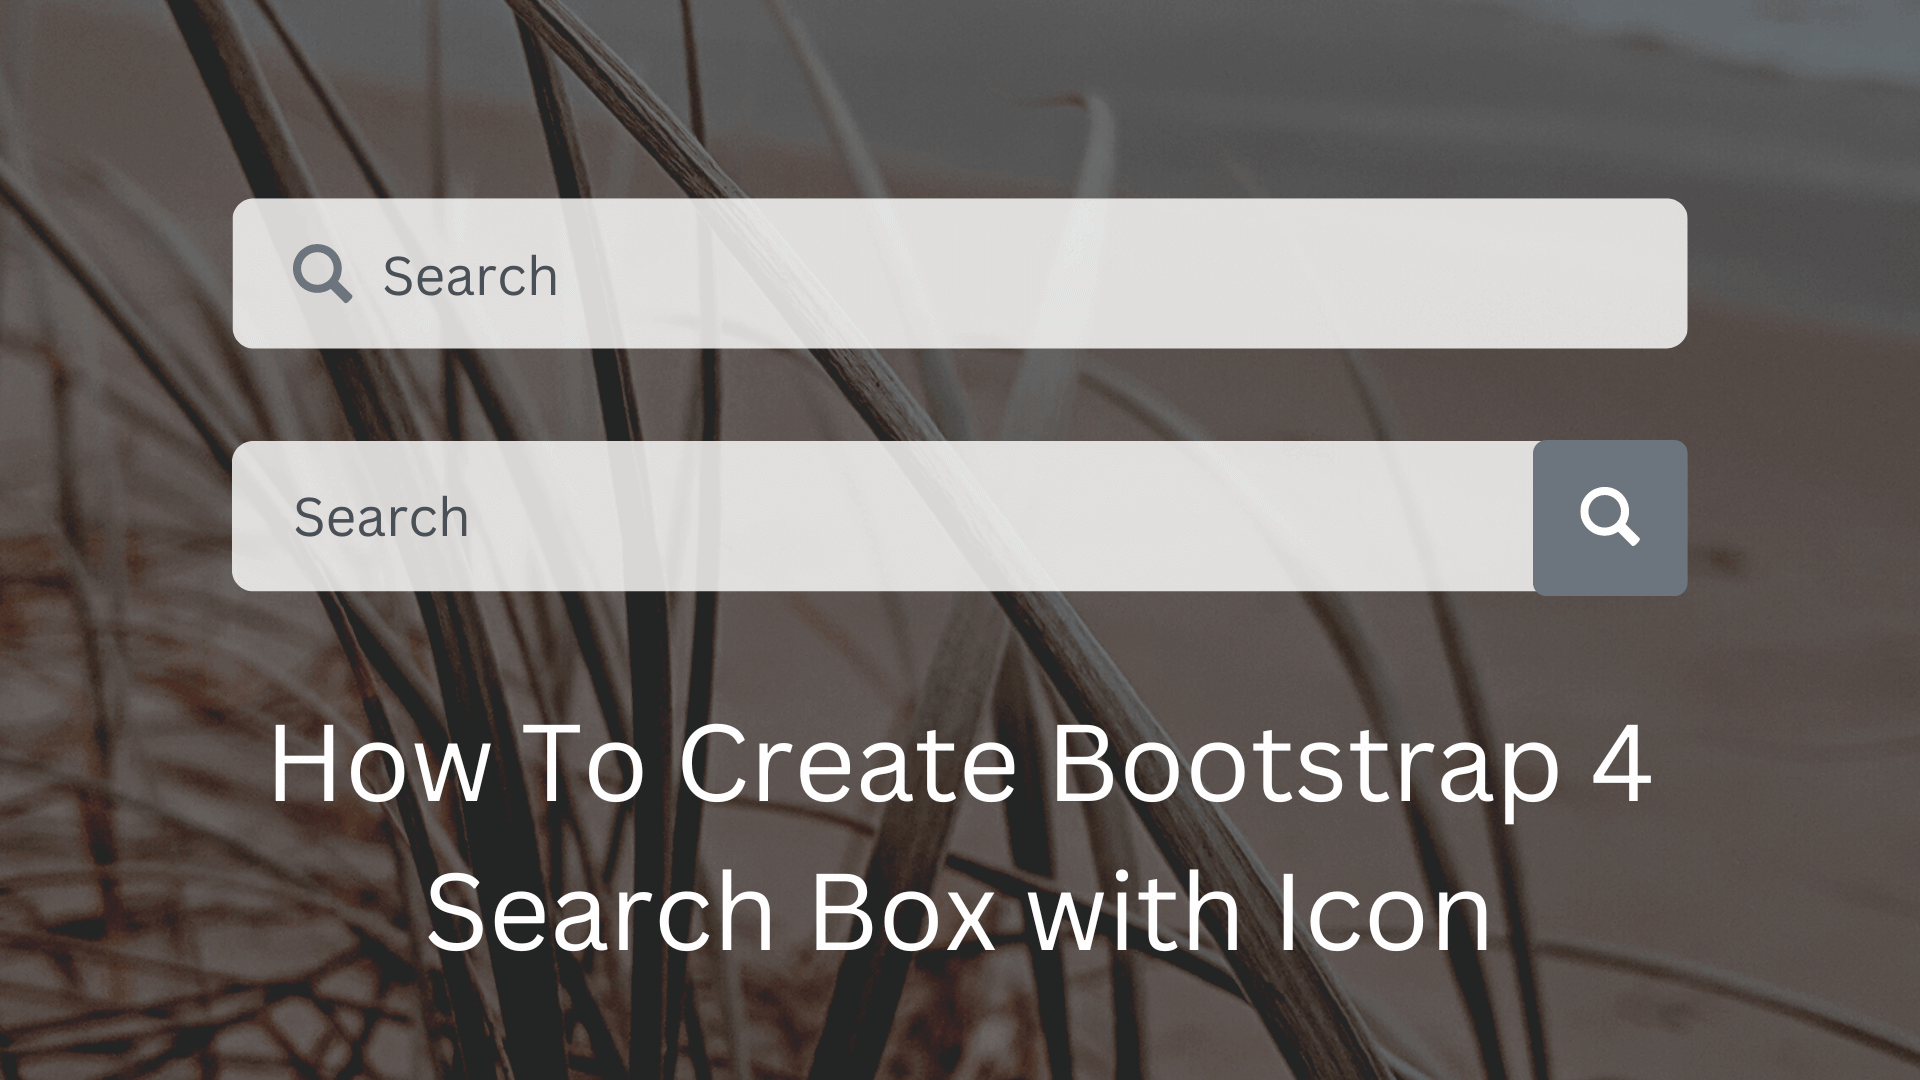 How To Create Bootstrap 4 Search Box with Icon